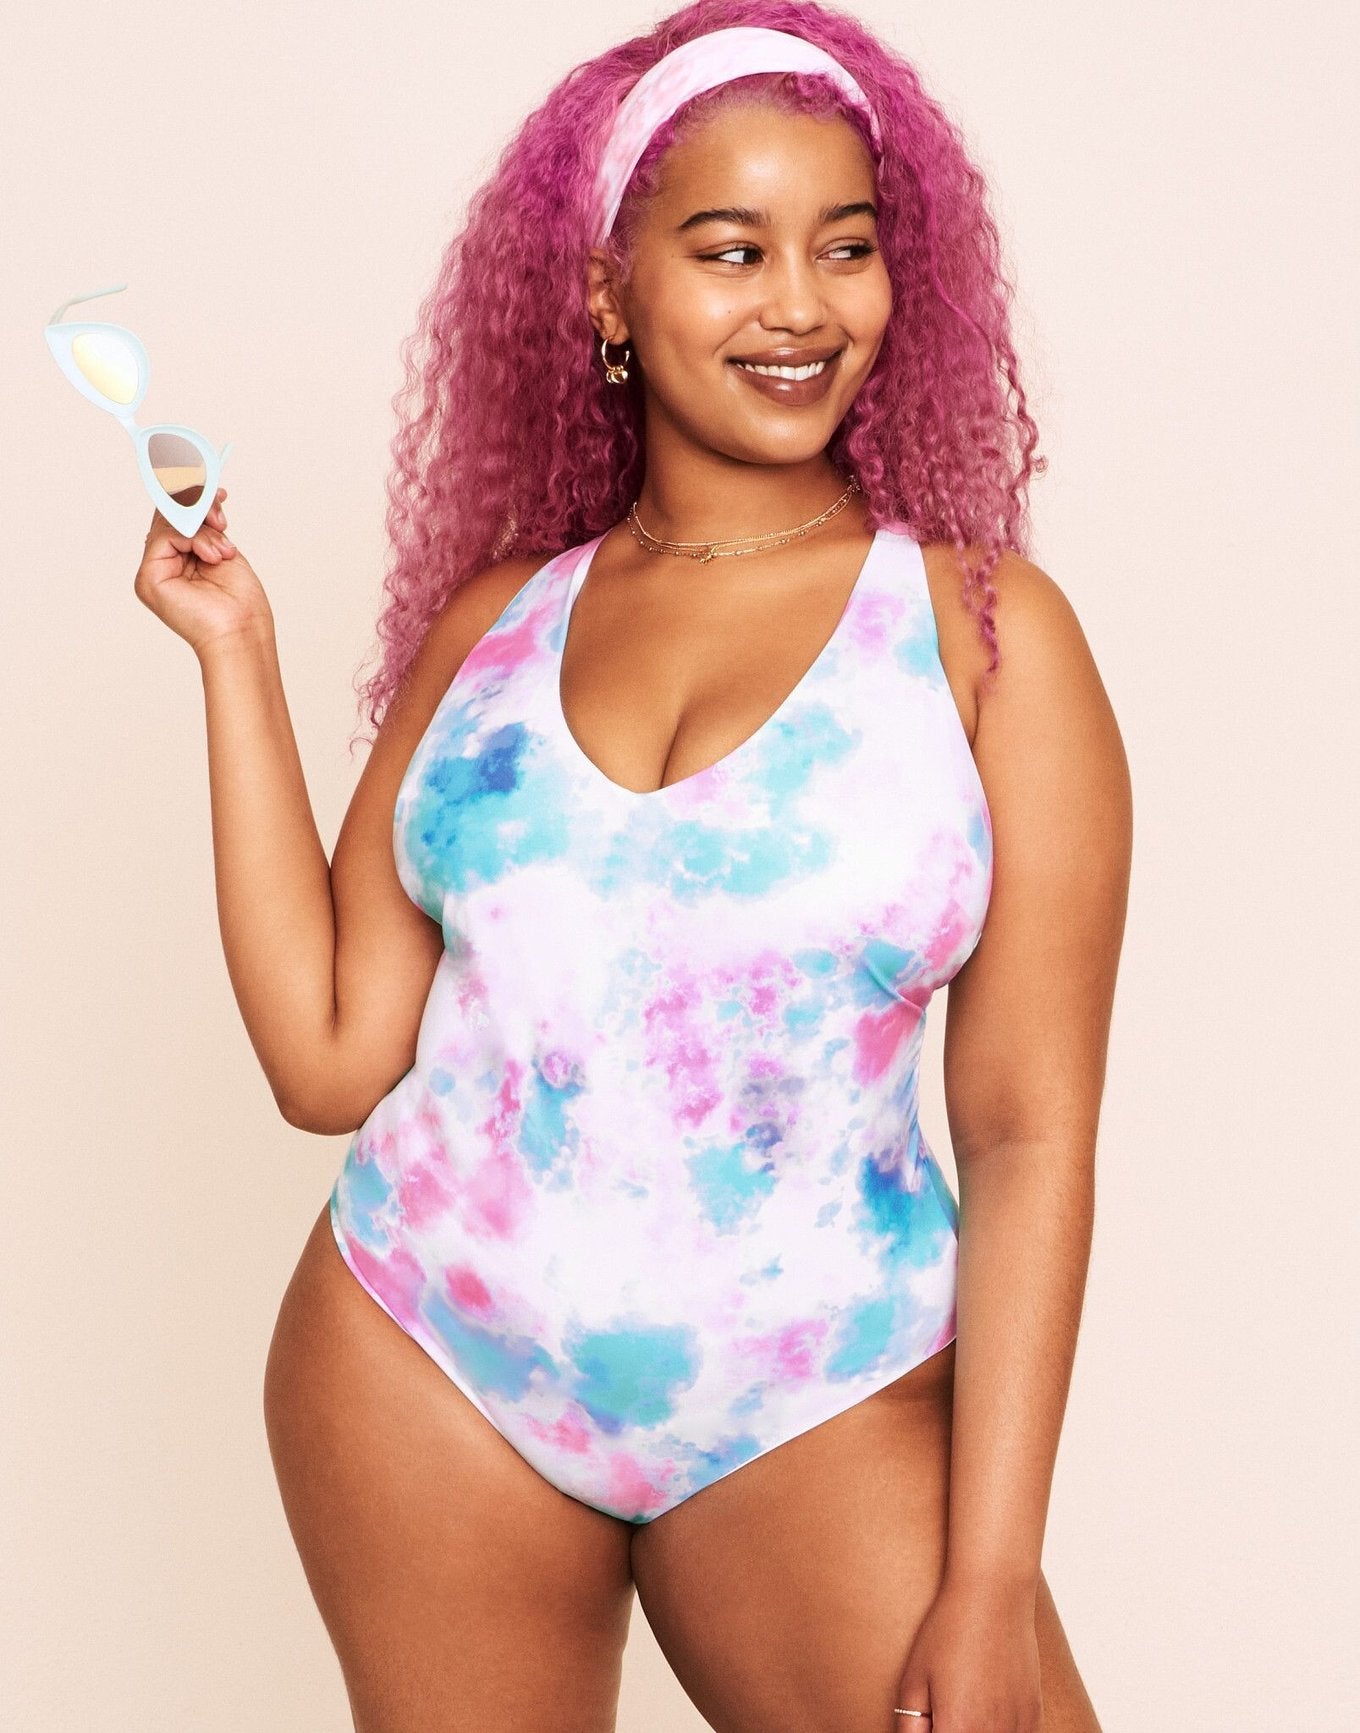 Earth Republic Serenity Reversible One Piece Reversible One-Piece in color PR171261 and shape one piece